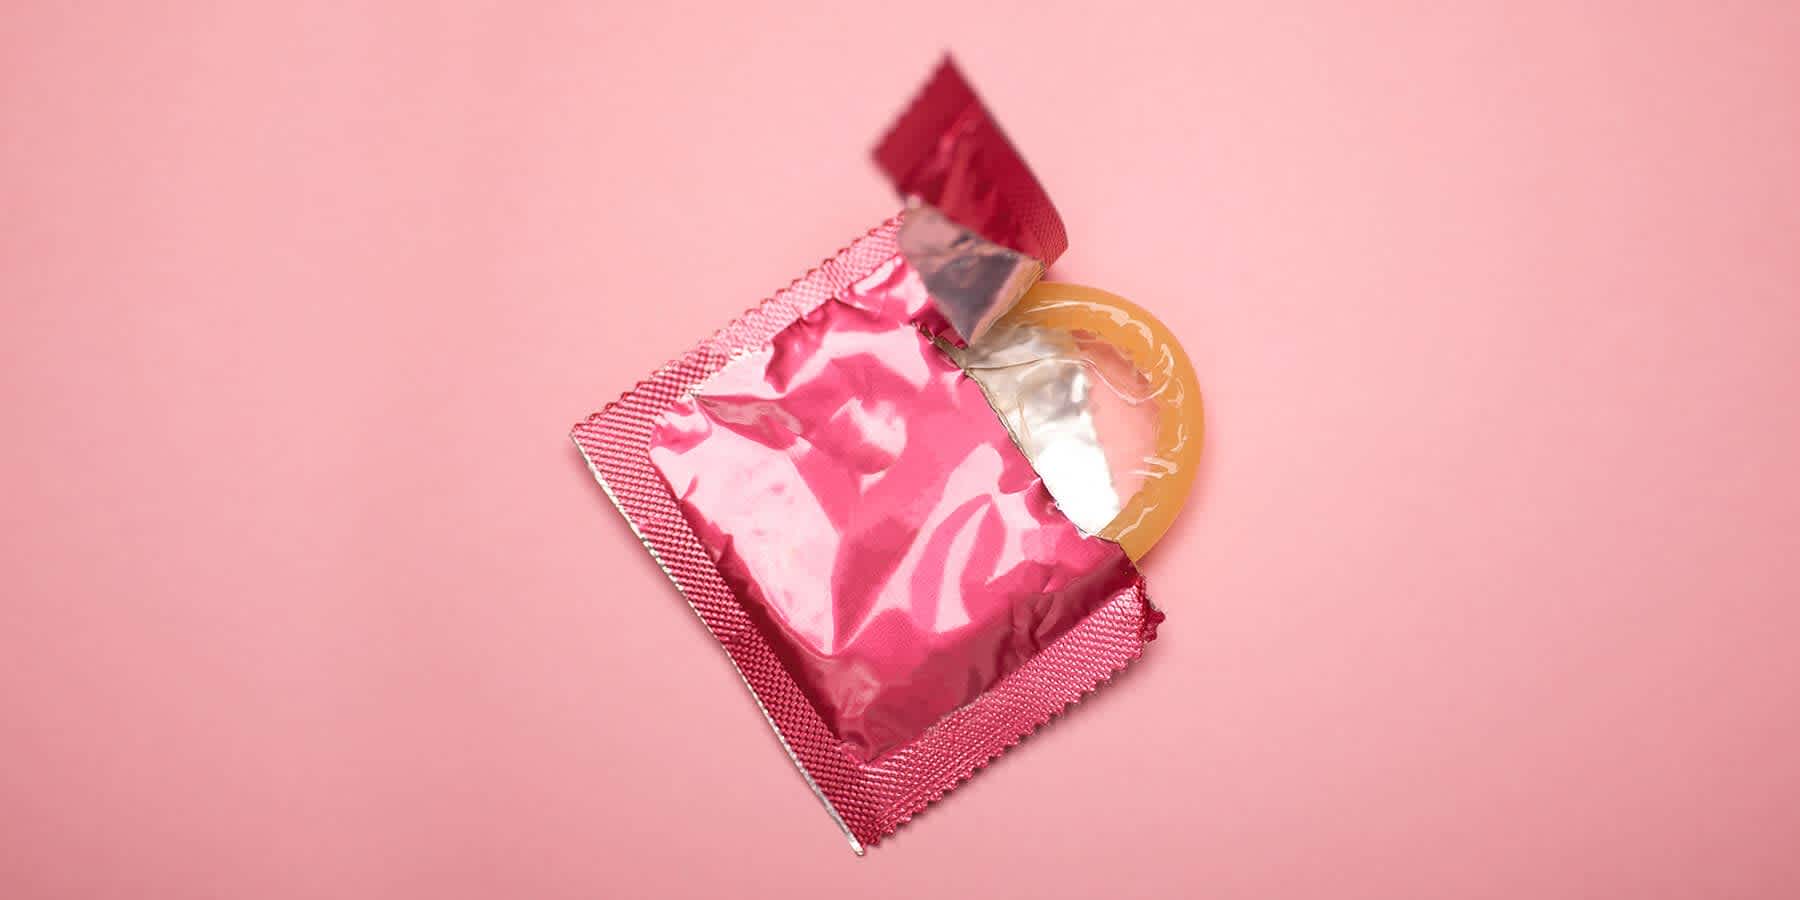 Condom in packaging to highlight safe sexual practice